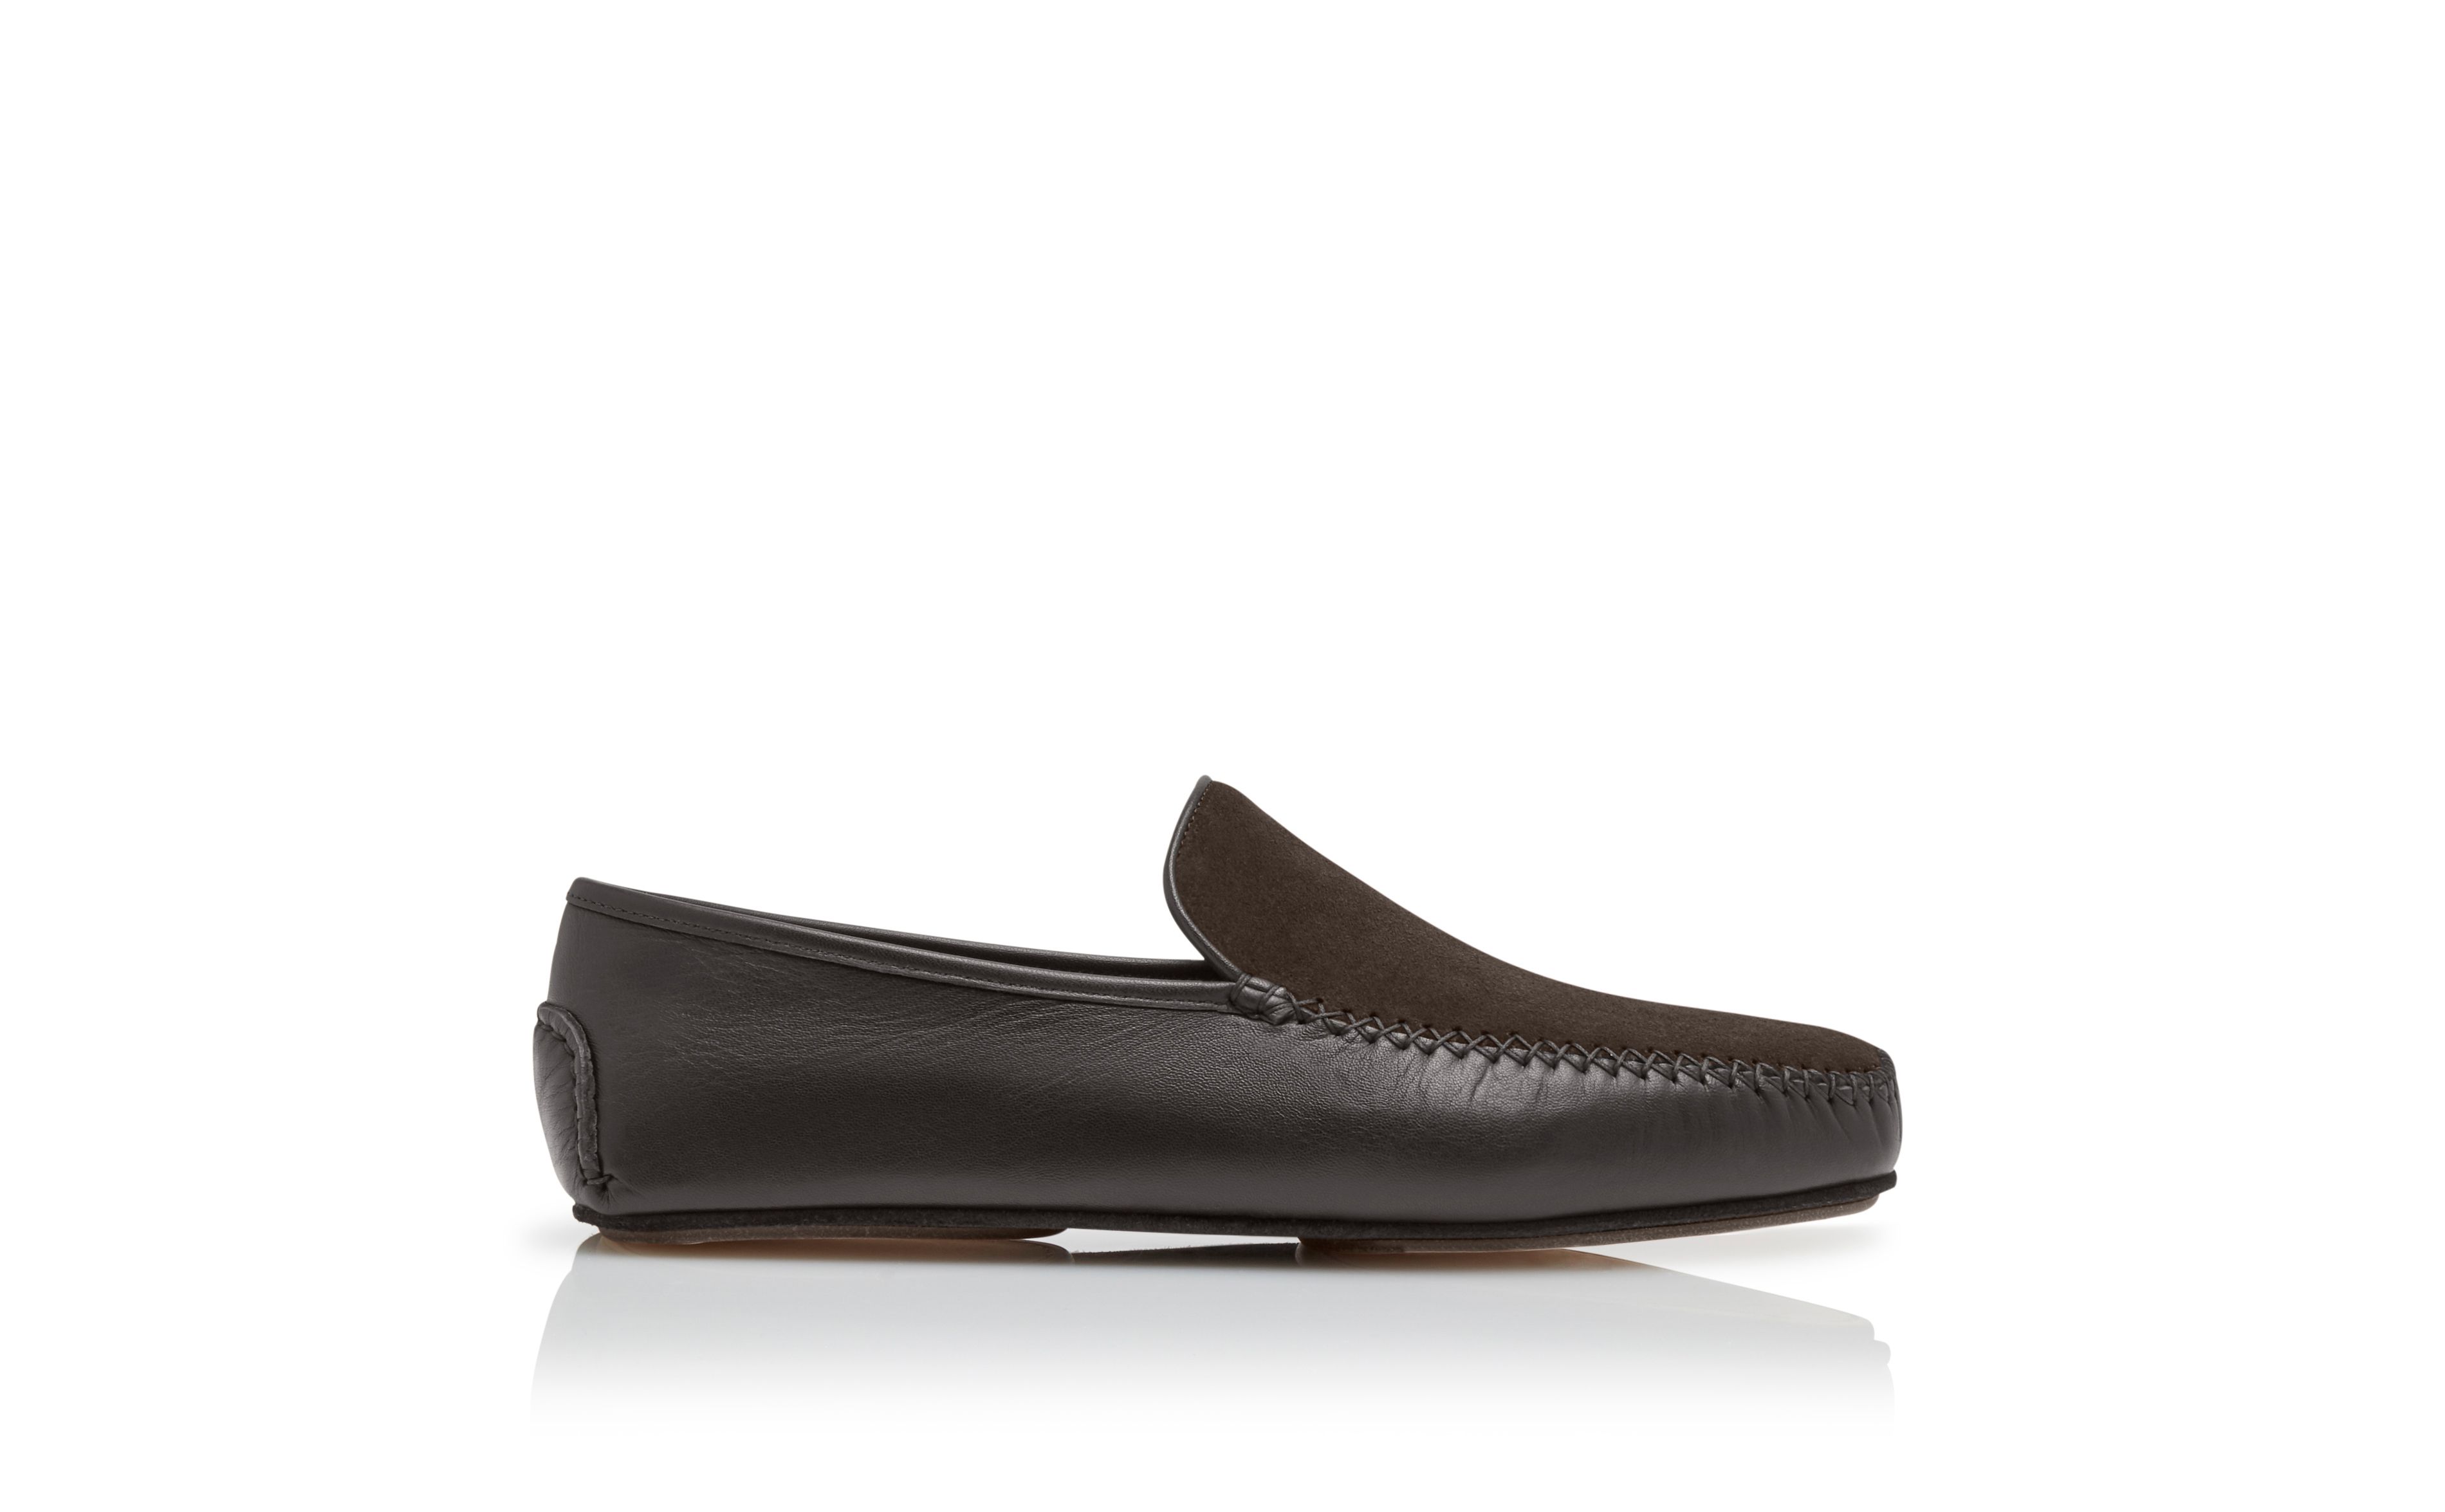 MAYFAIR | Men's Brown Nappa Leather and Suede Driving Shoes | Manolo ...